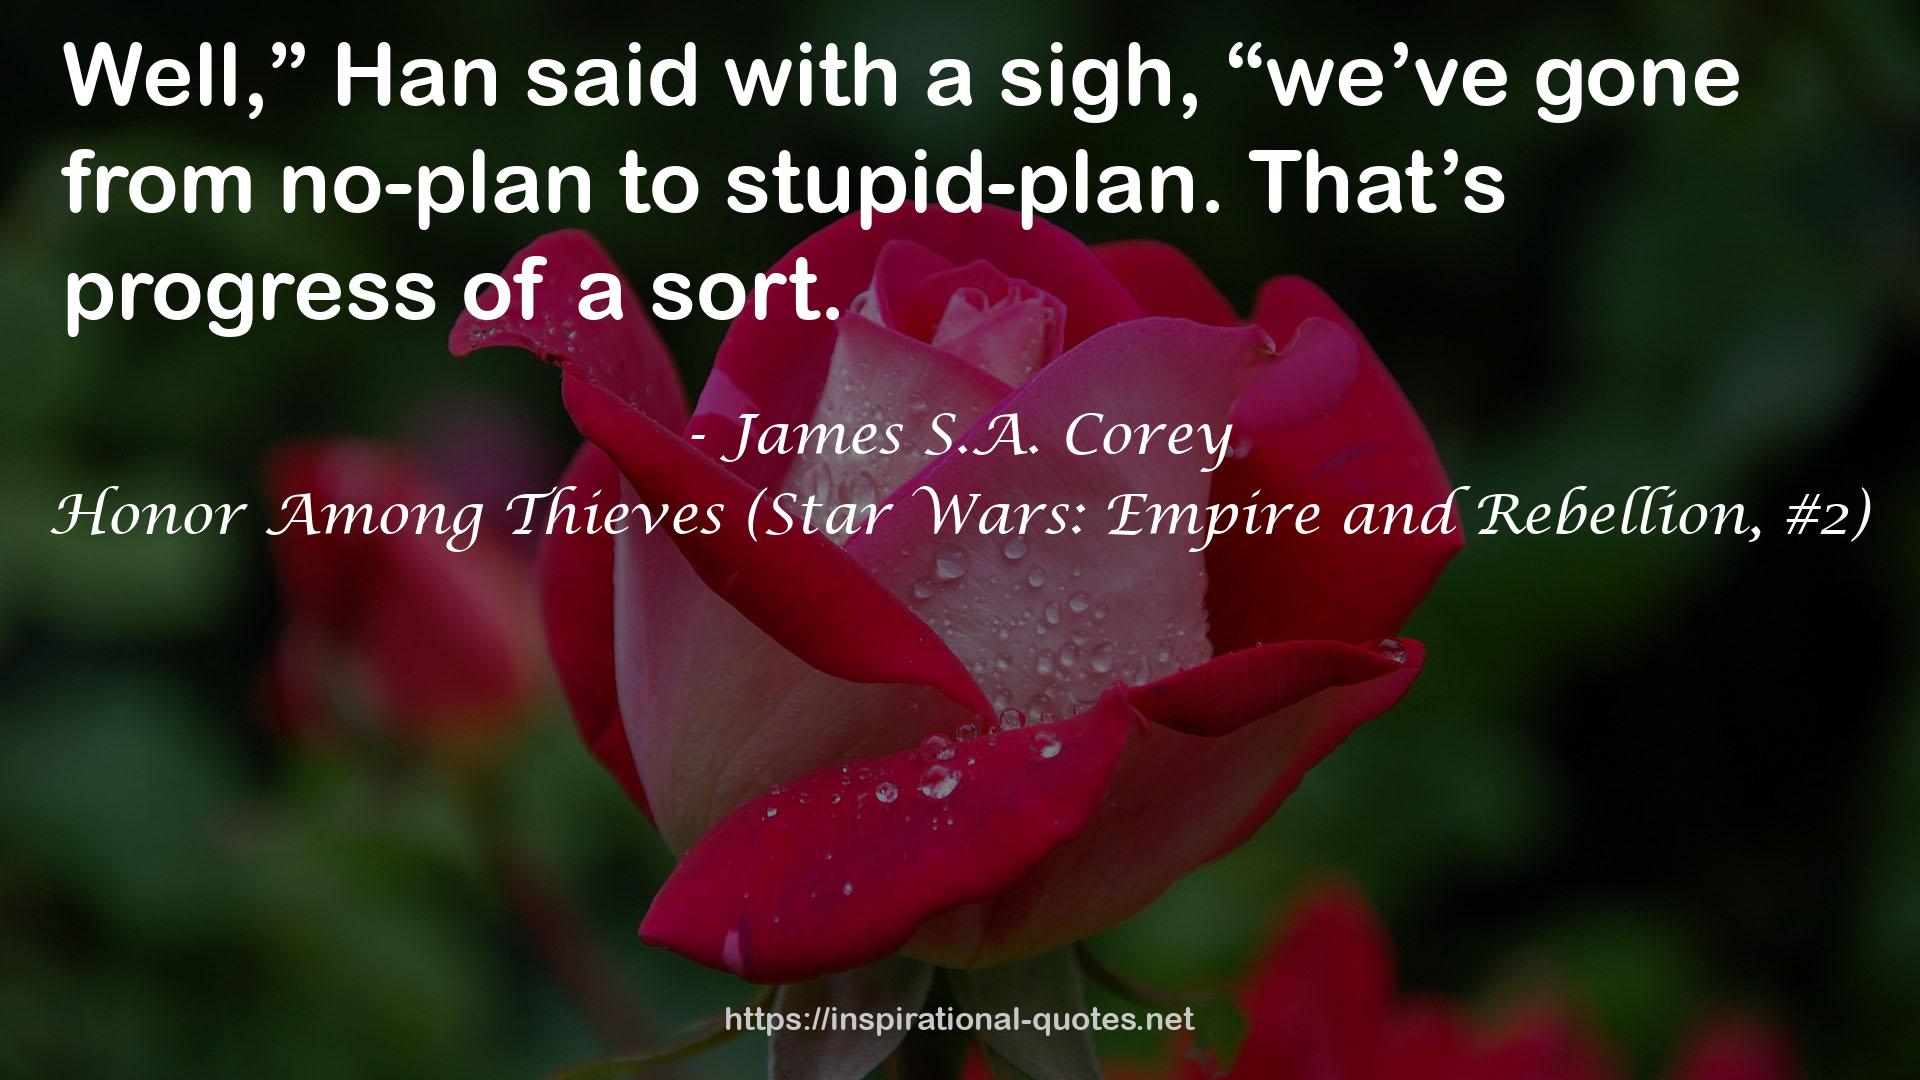 Honor Among Thieves (Star Wars: Empire and Rebellion, #2) QUOTES